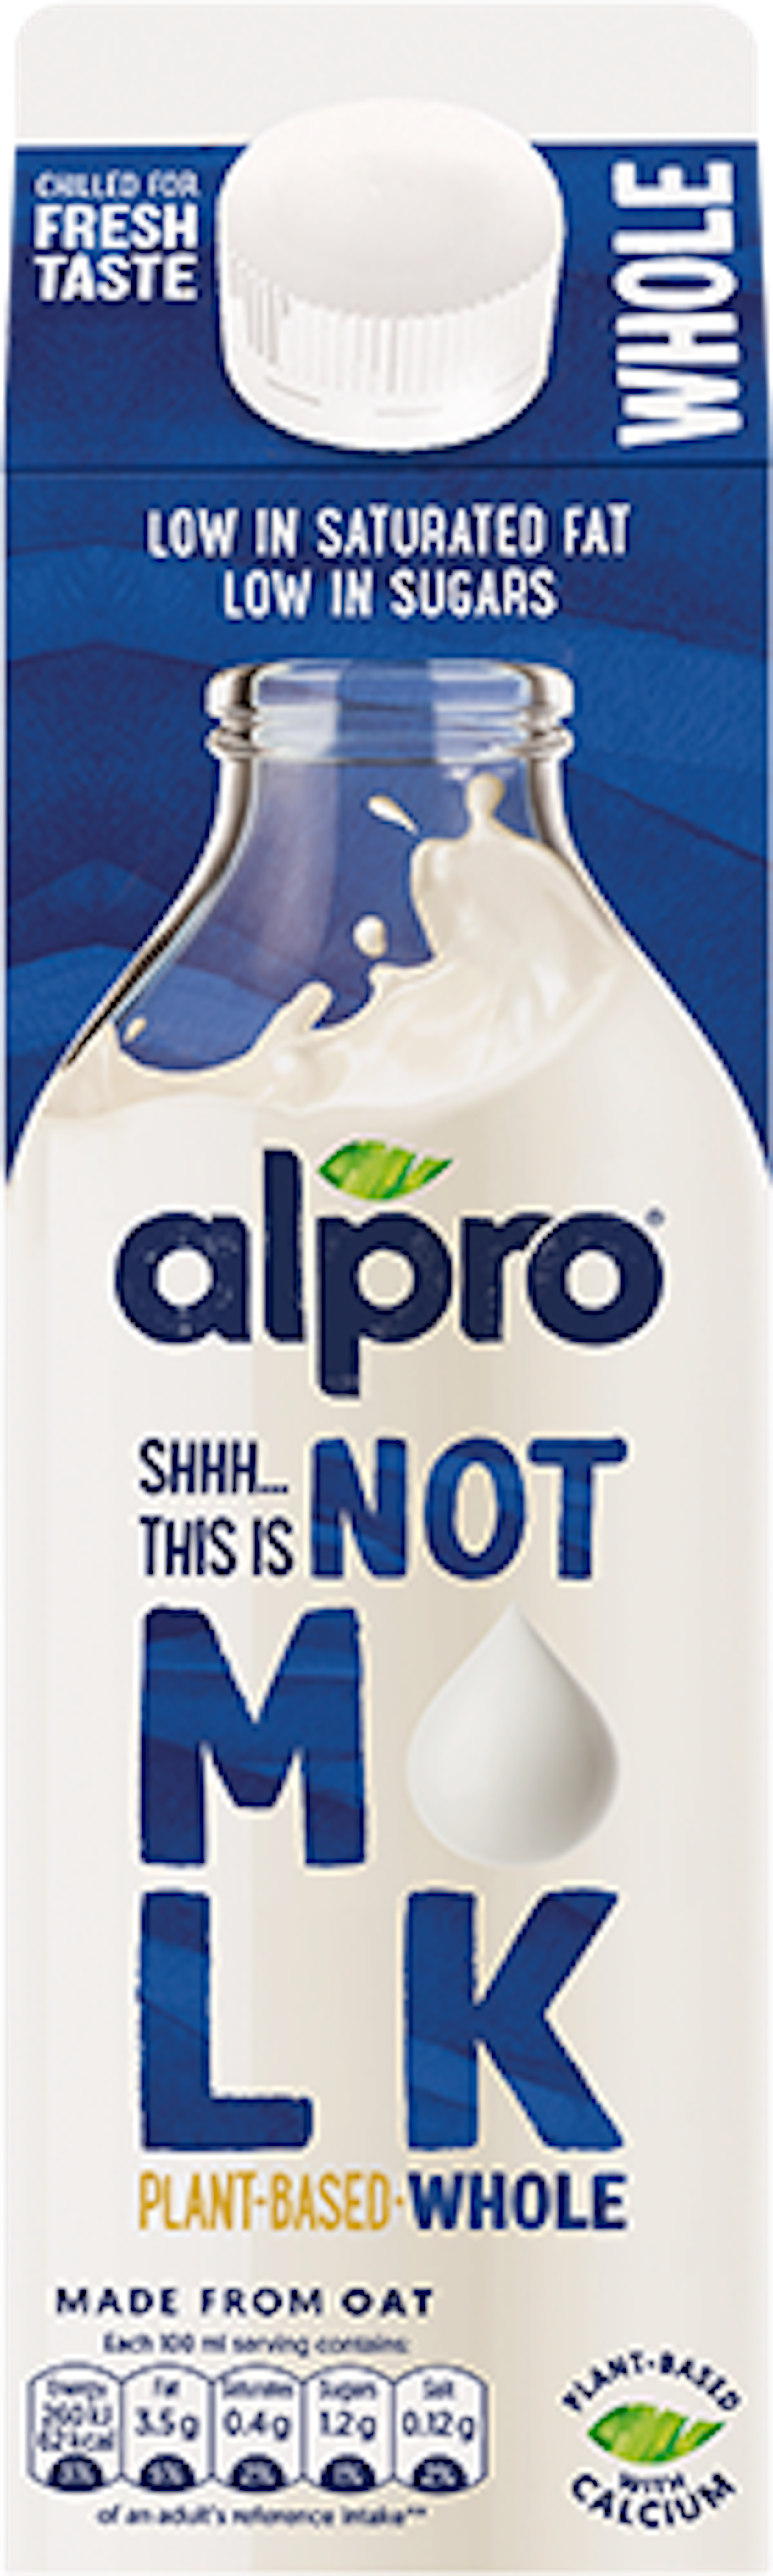 Alpro This is not M*lk Whole Chilled